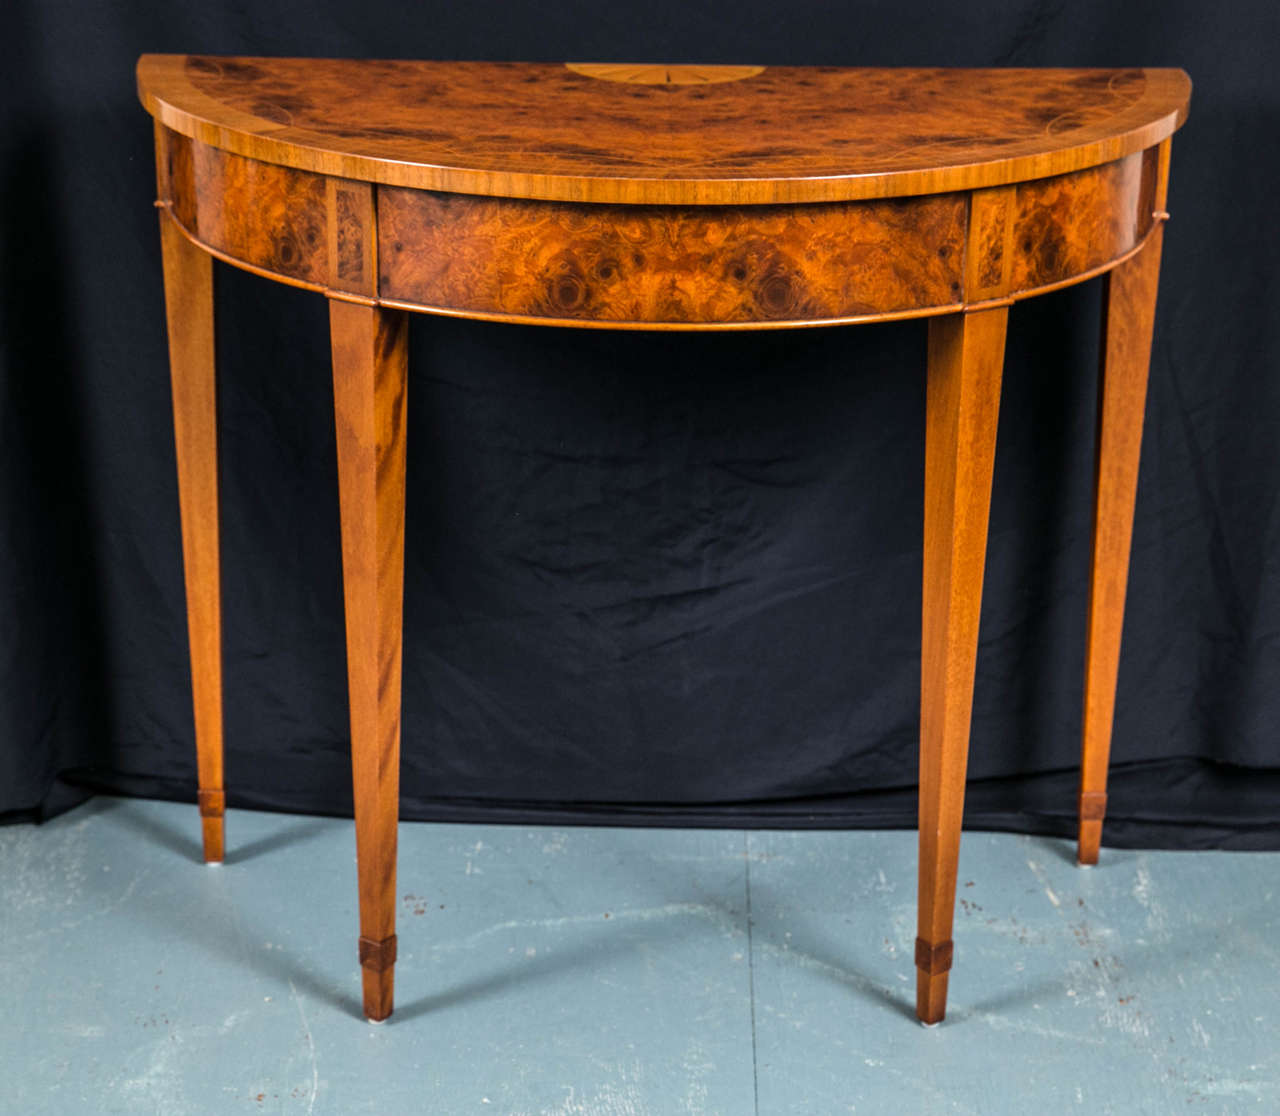 Custom made for us in England by our talented craftsmen this table features a segmented, bookmatched top with boxwood inlays, a deep apron and tapered legs. A classic look that offers myriad options for use as side table that will blend with just